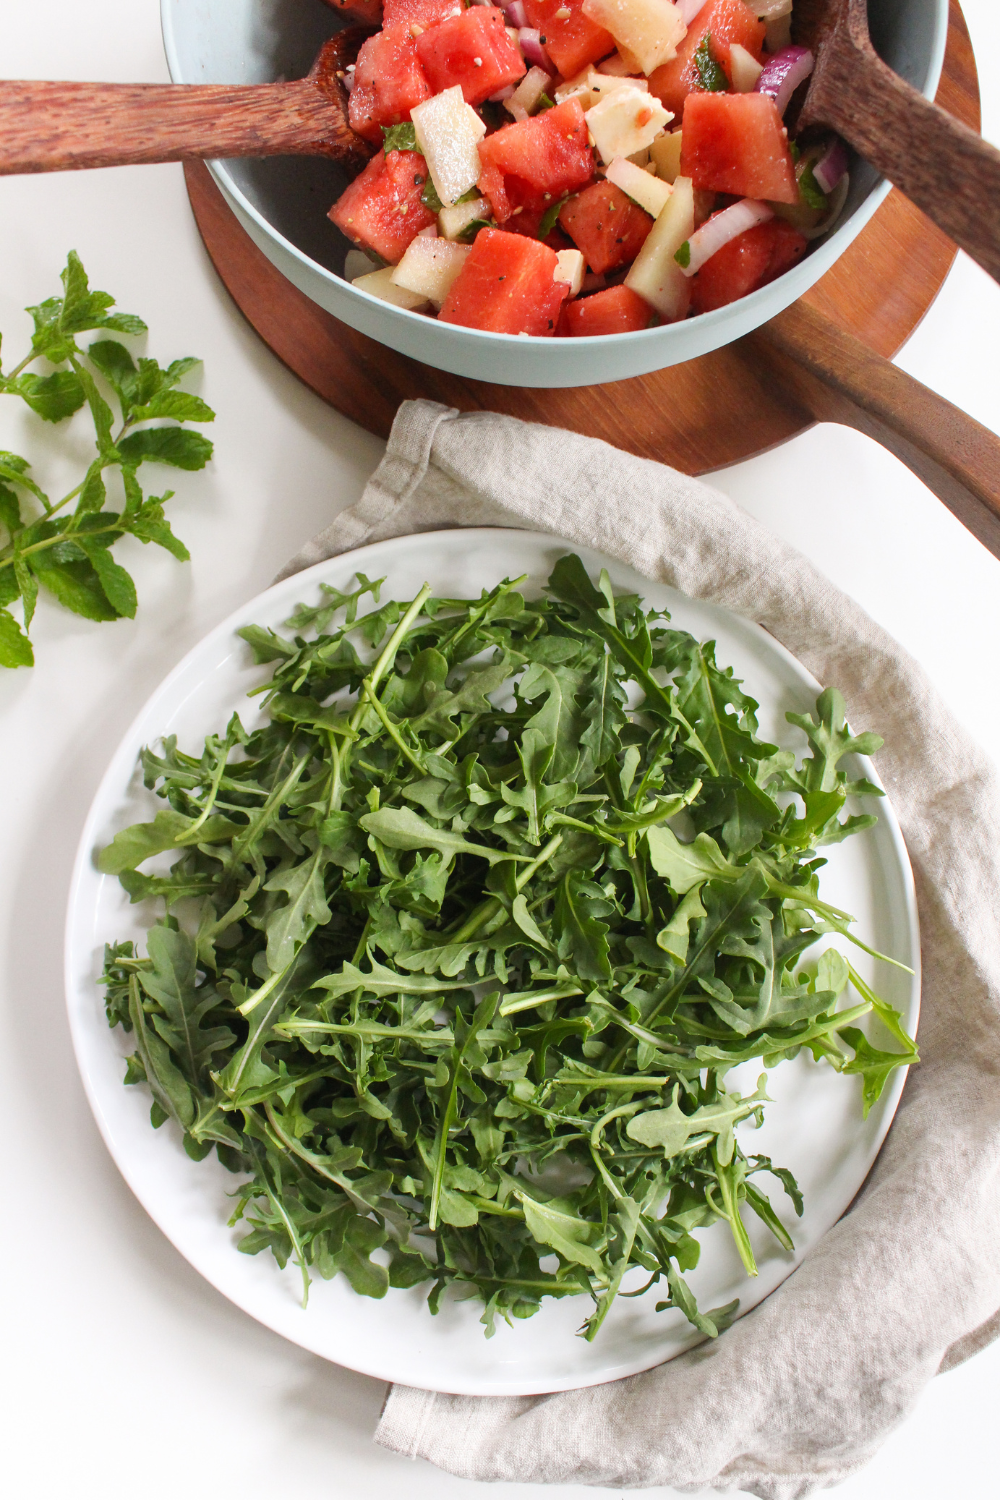 a plate with arugula and salad ingredients on the side